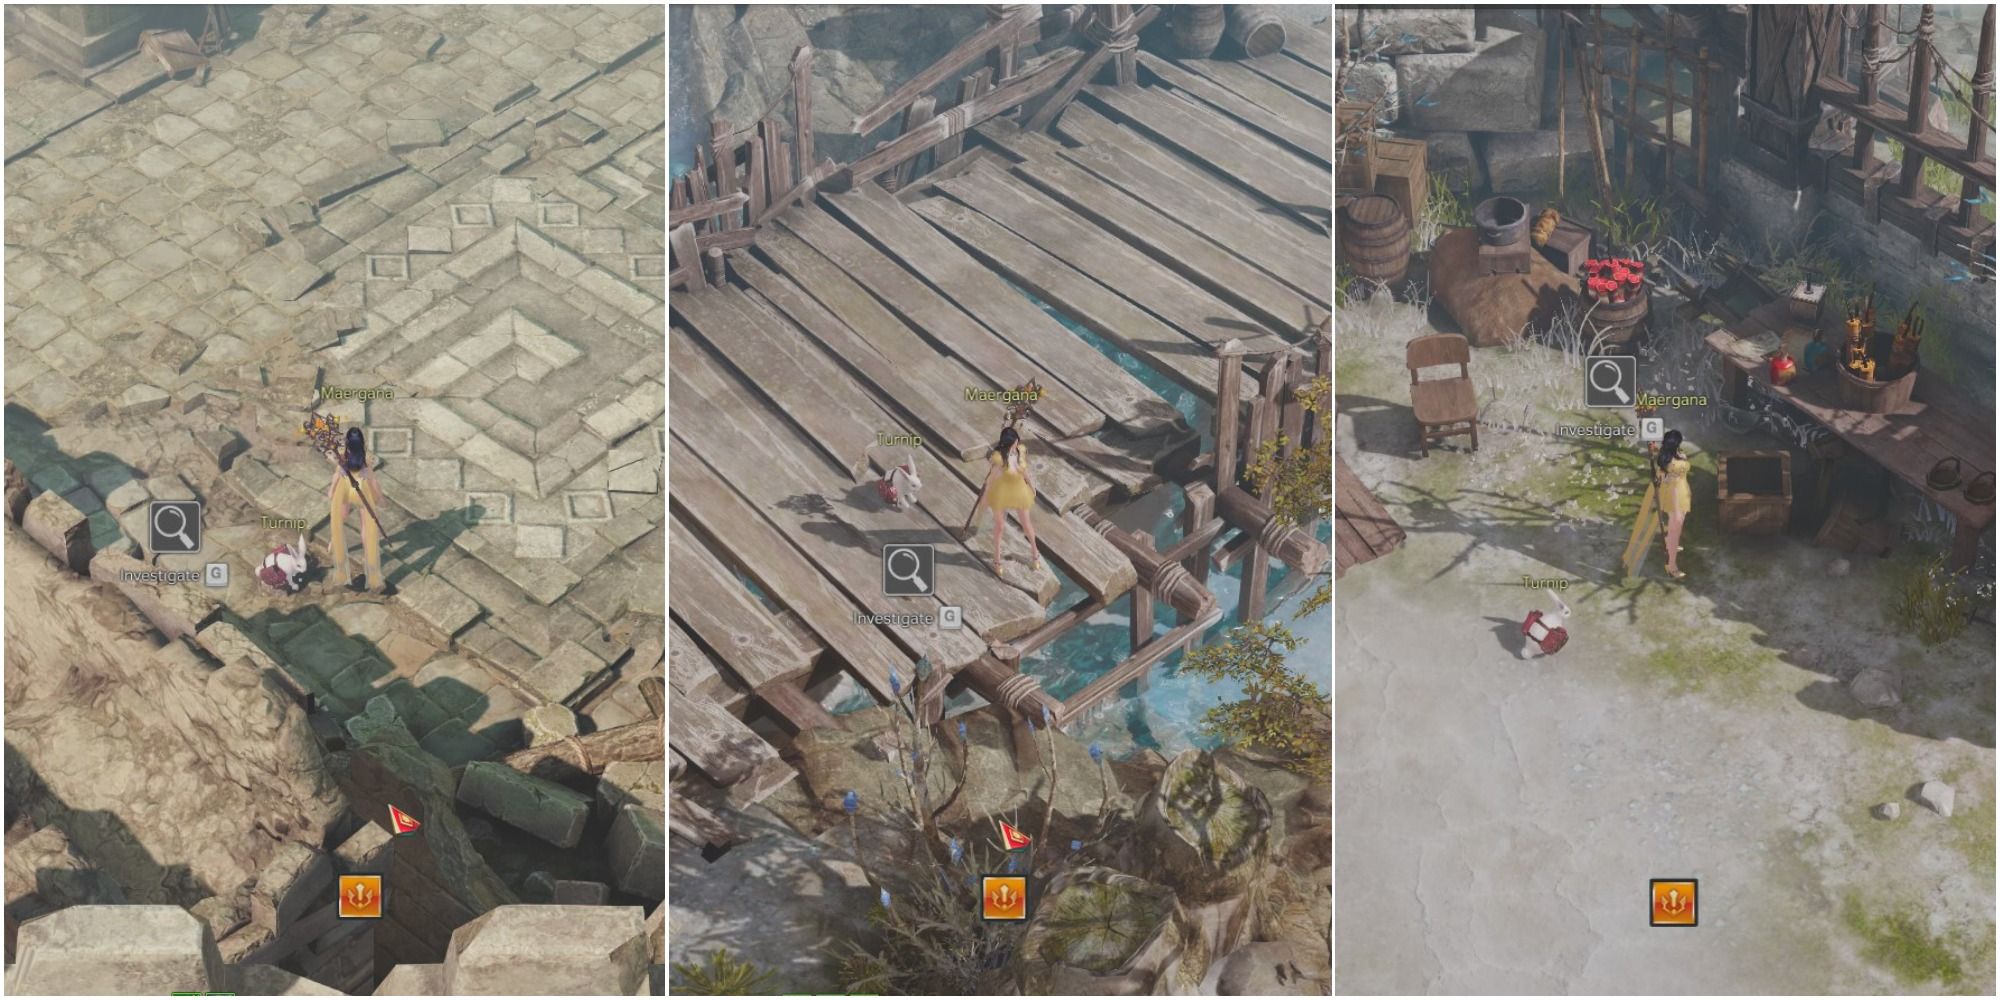 Split image of player standing in stone ruins, play standing on broken wooden bridge over a creek, and player standing at market stall in desert area